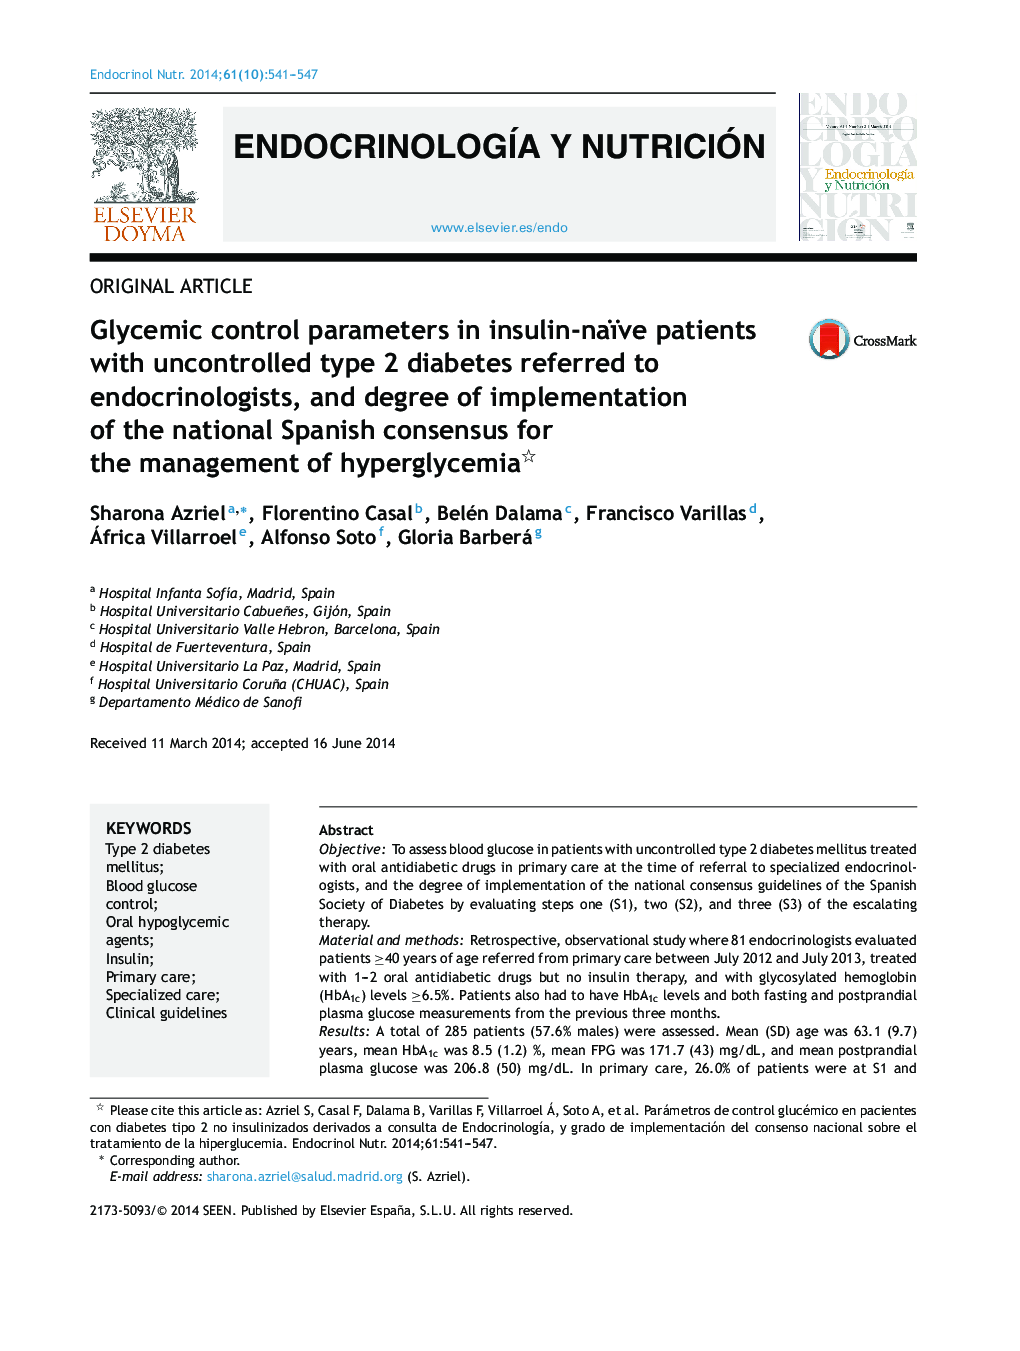 Glycemic control parameters in insulin-naïve patients with uncontrolled type 2 diabetes referred to endocrinologists, and degree of implementation of the national Spanish consensus for the management of hyperglycemia 